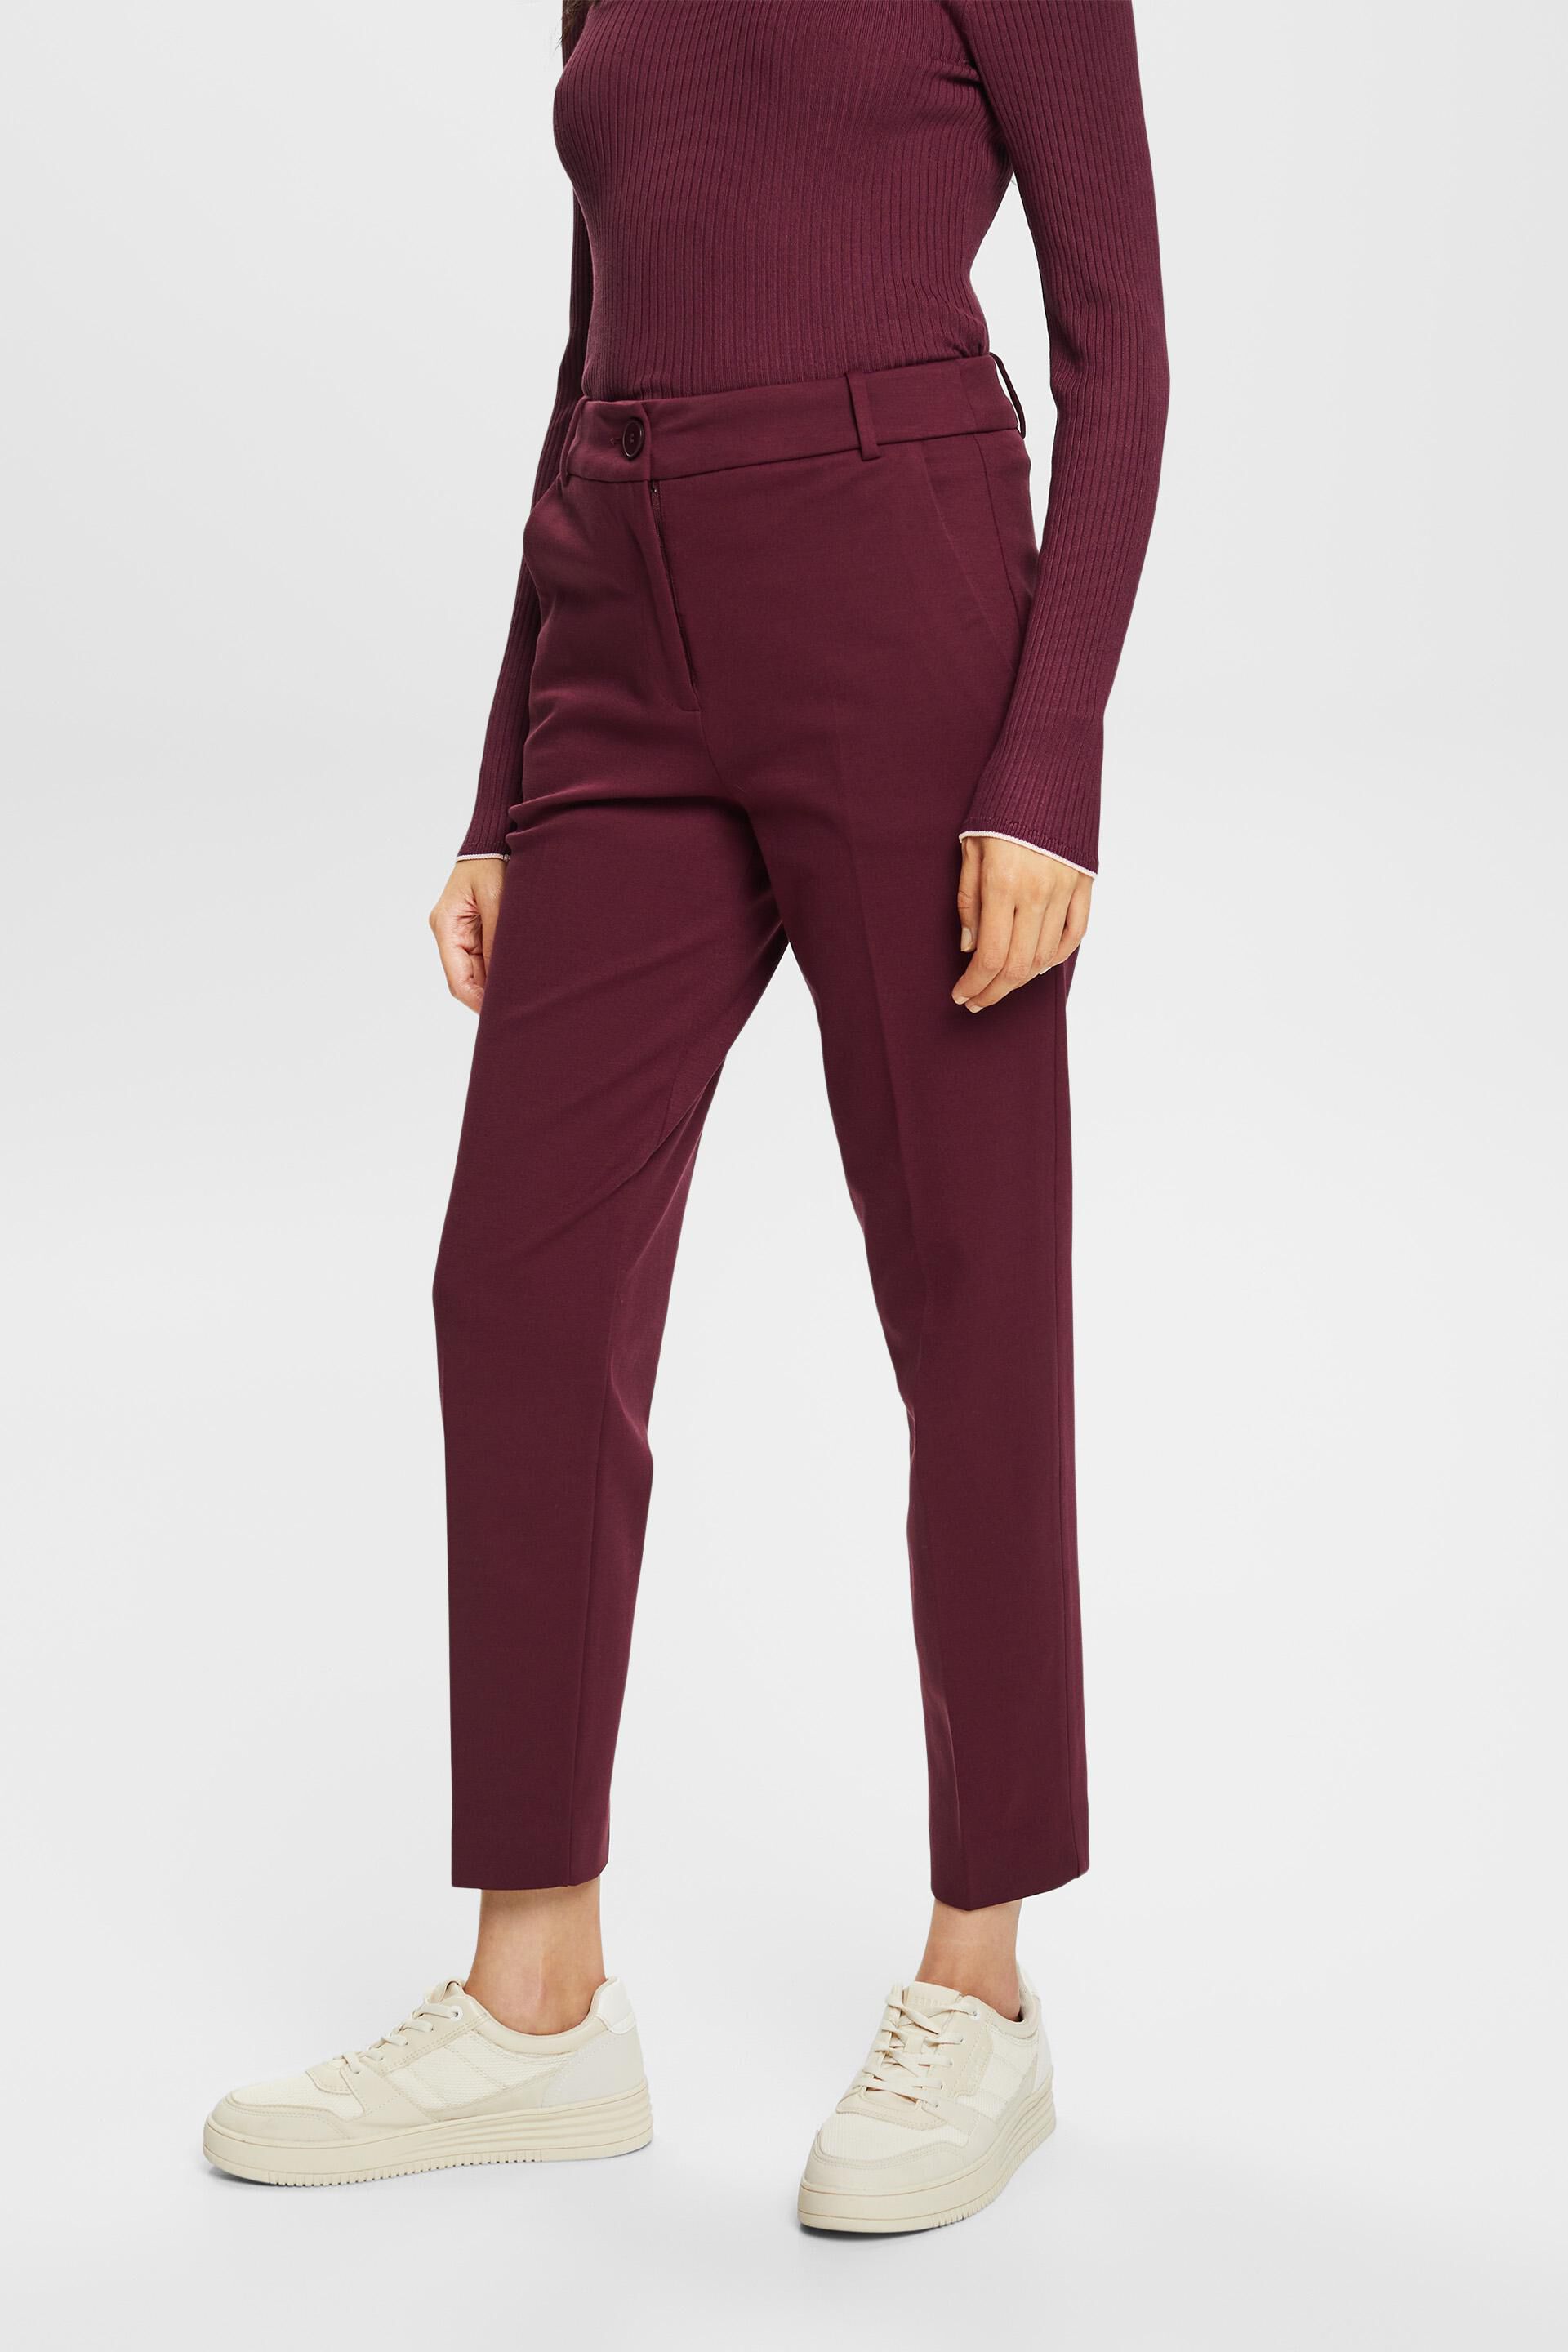 Esprit SPORTY PUNTO match trousers tapered mix &